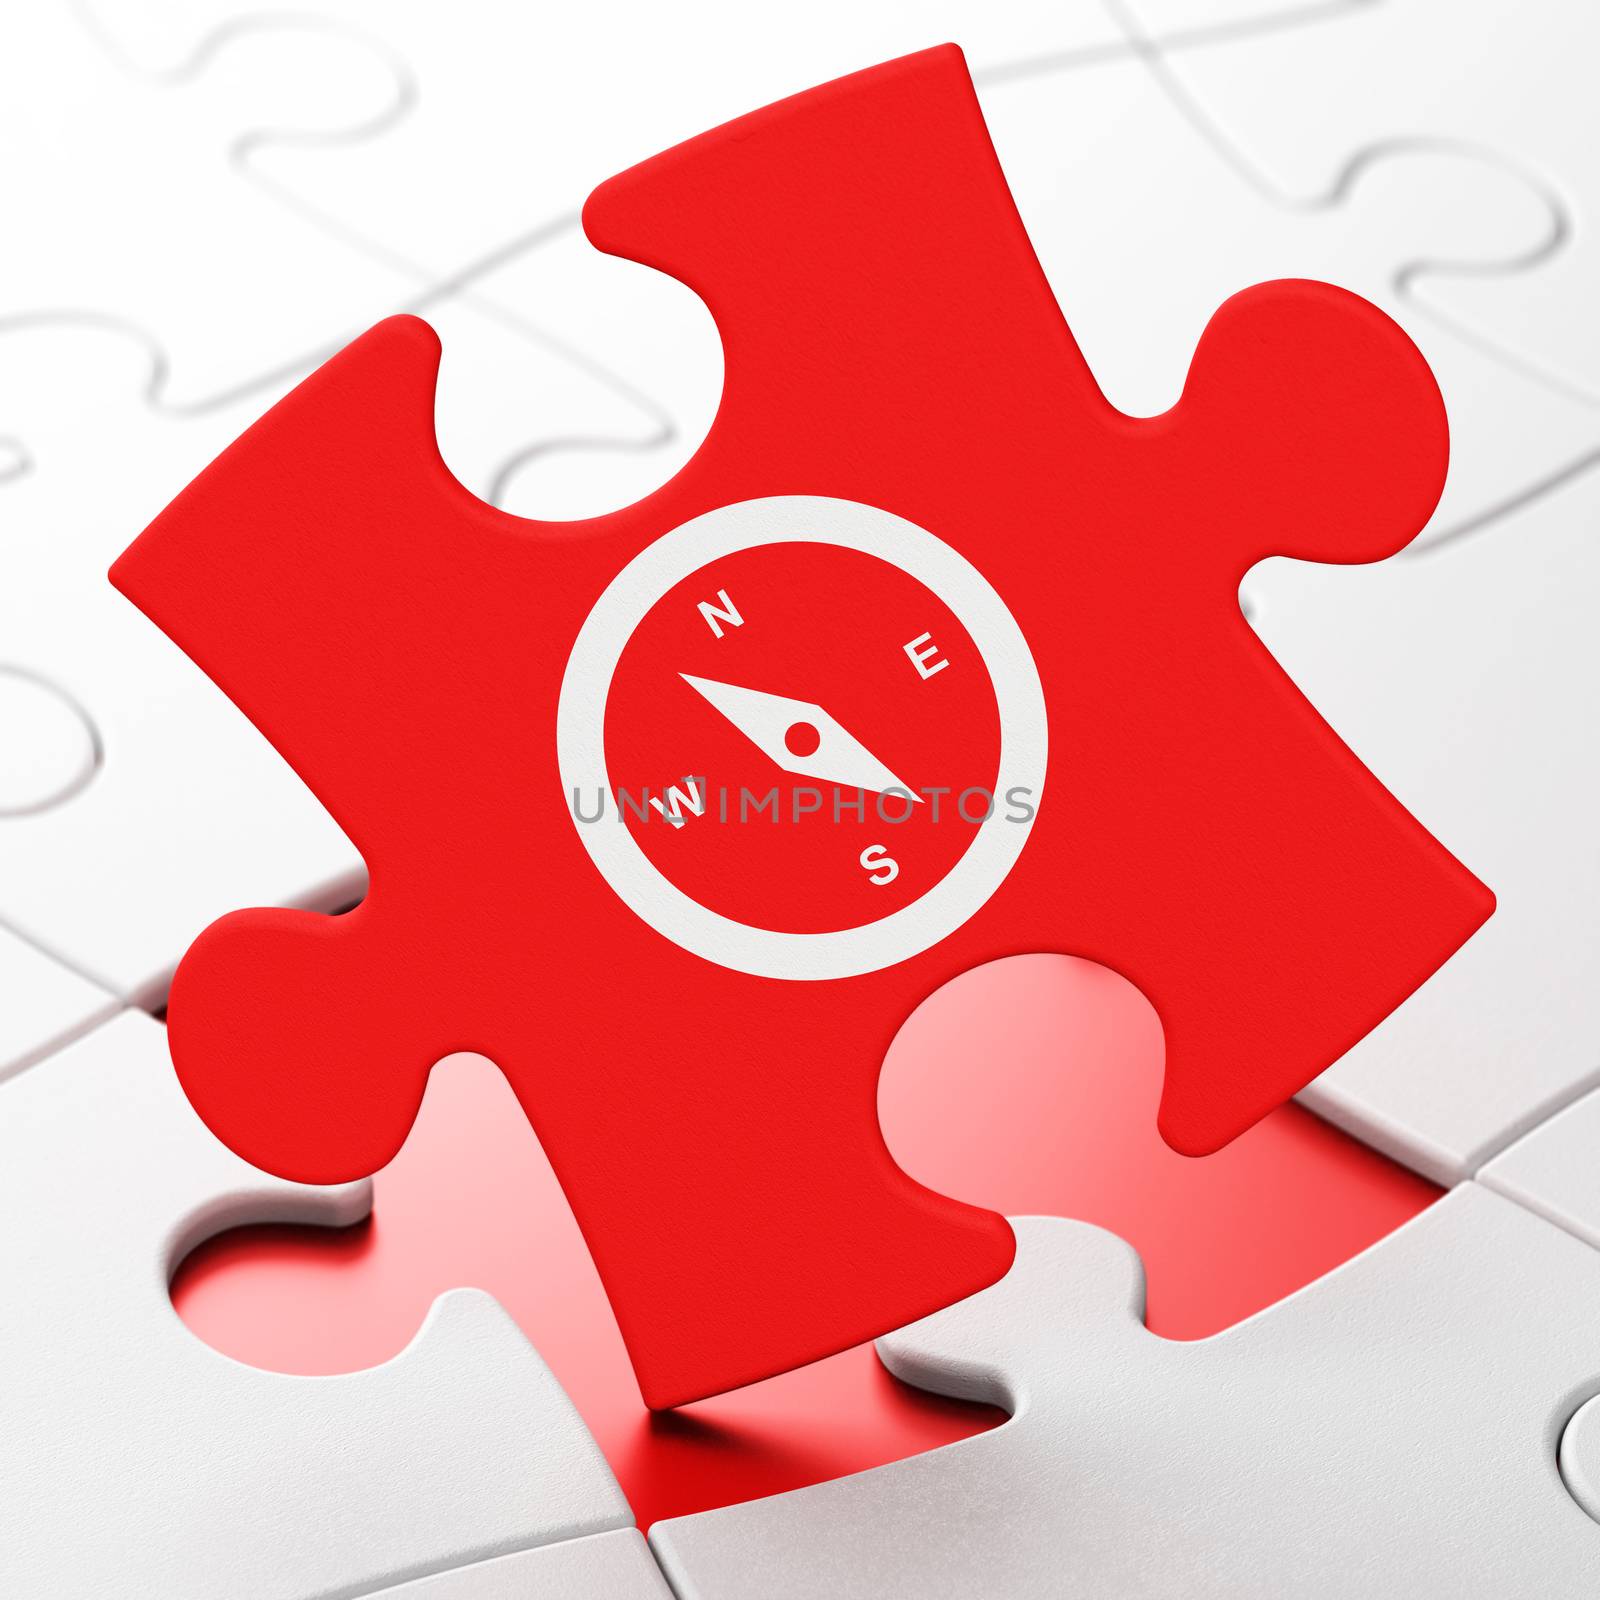 Tourism concept: Compass on Red puzzle pieces background, 3D rendering